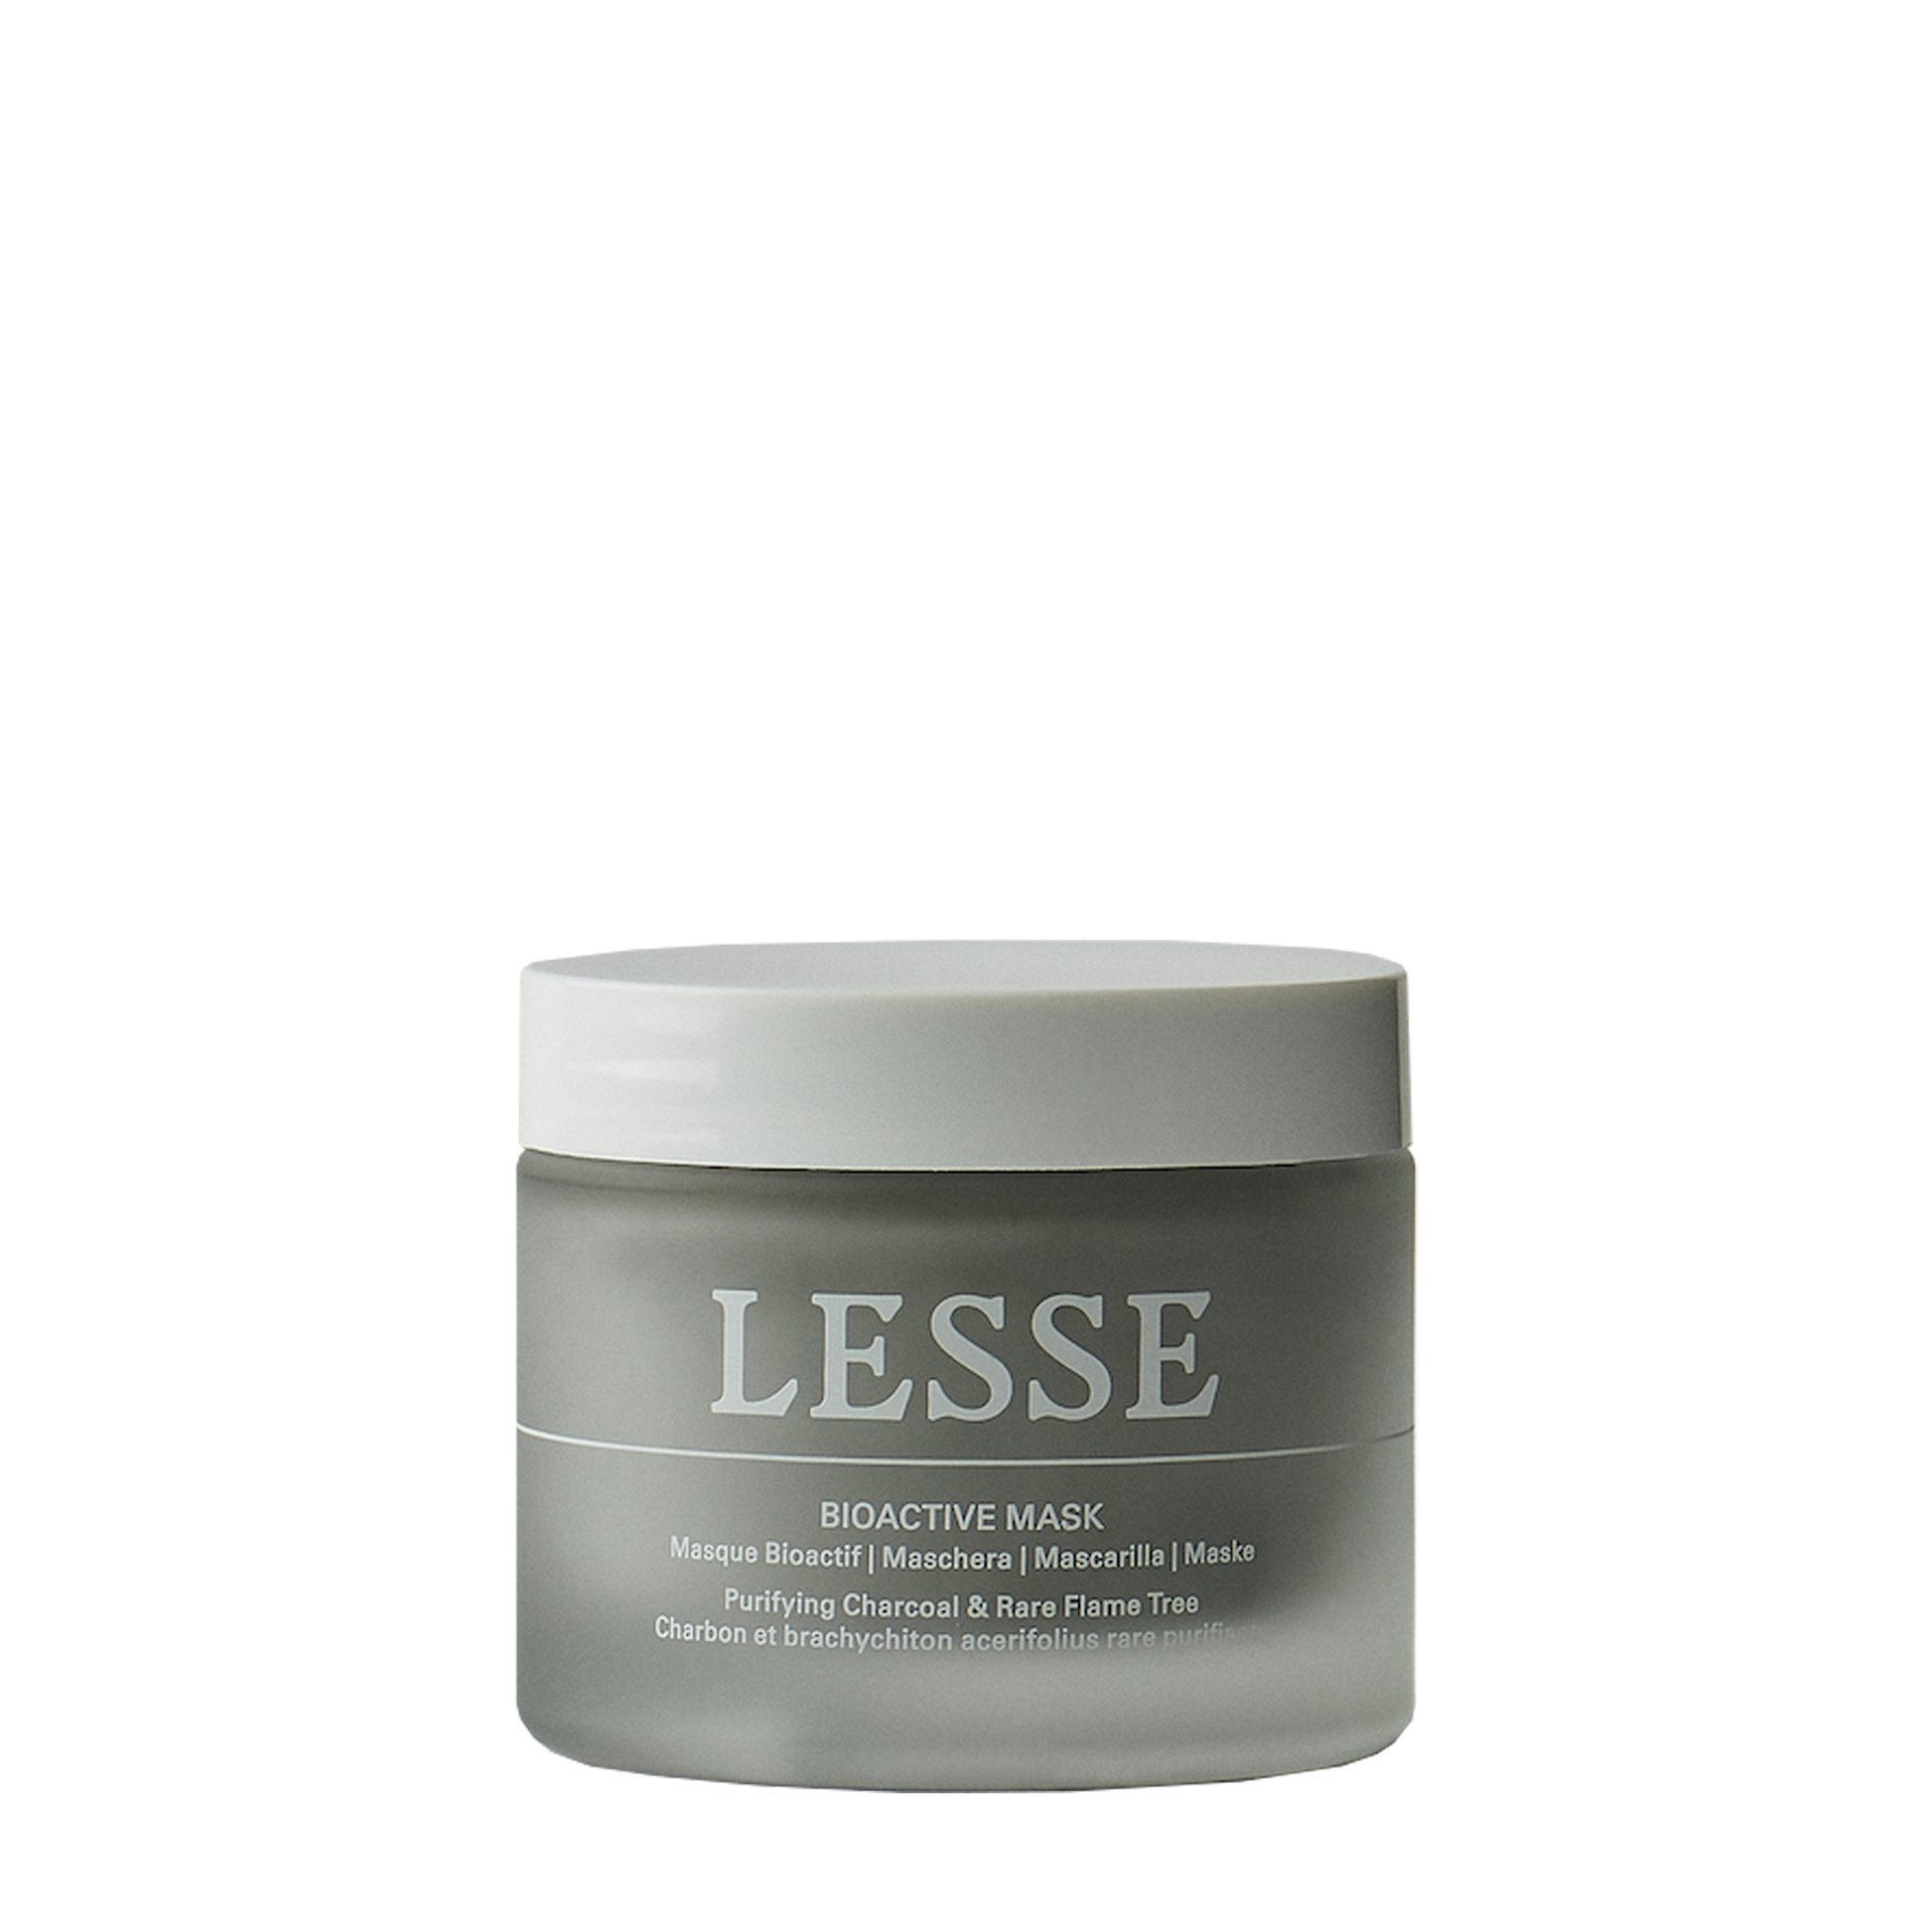 Bioactive Mask from LESSE